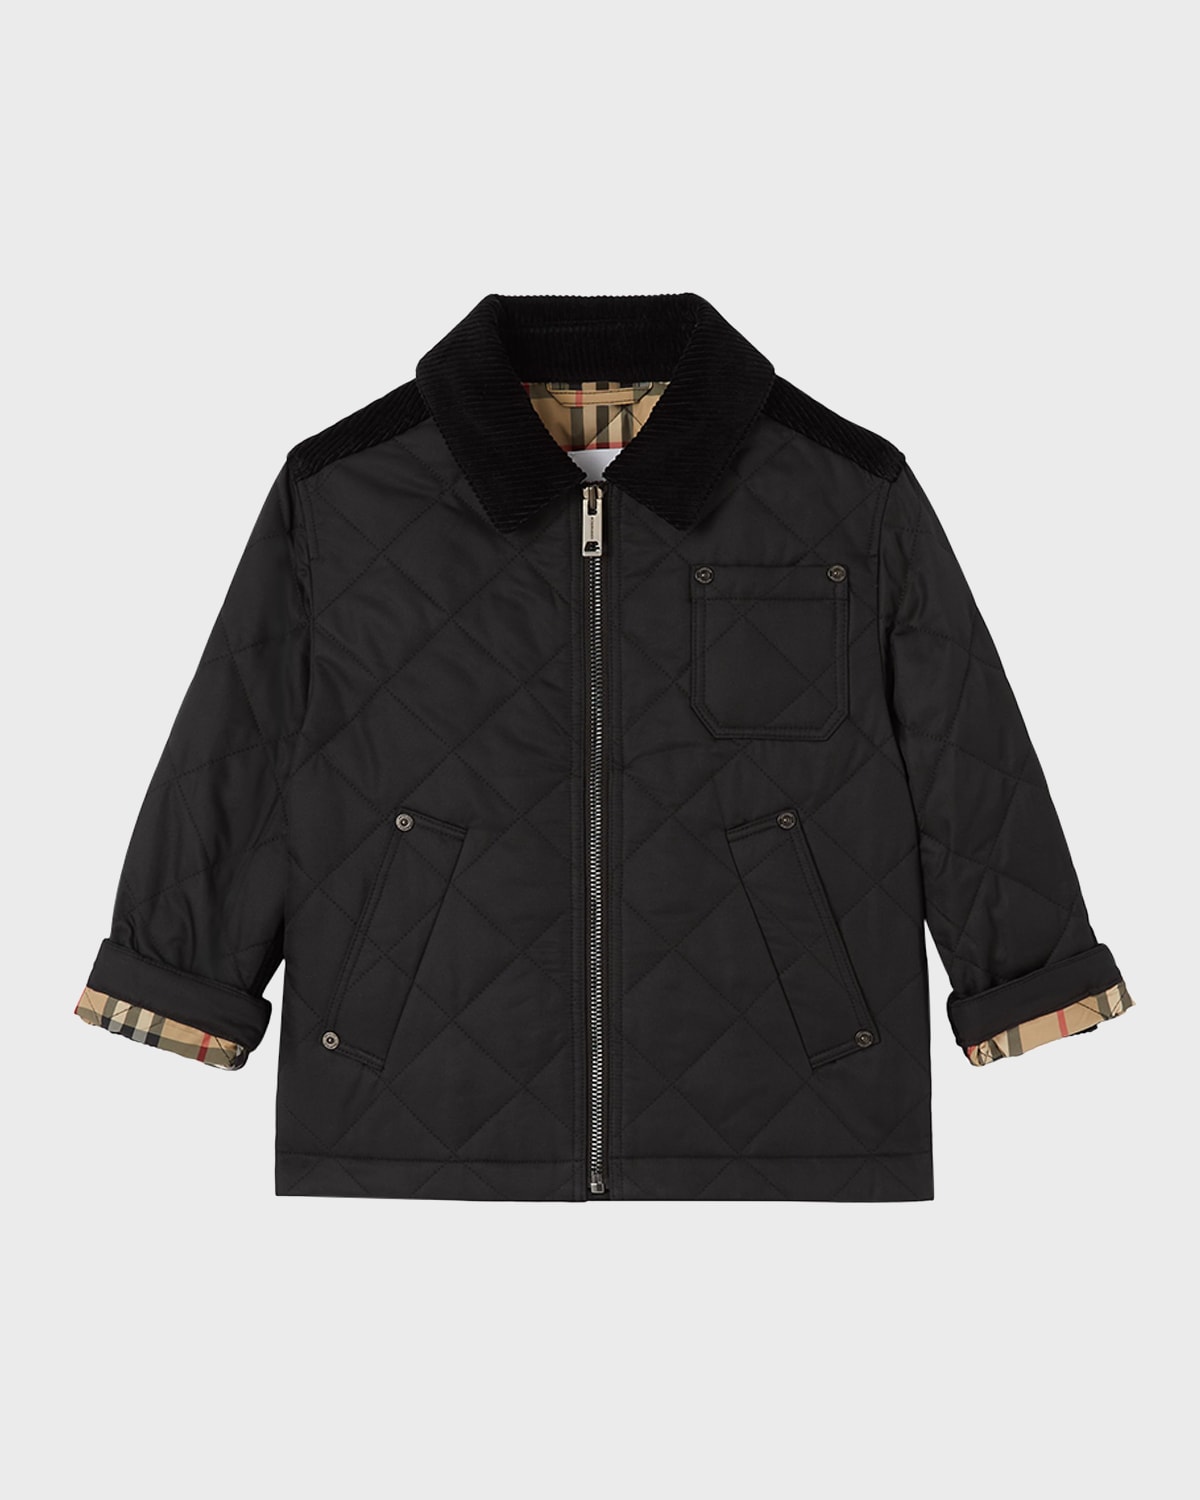 BURBERRY KID'S RENFRED CORD QUILTED JACKET